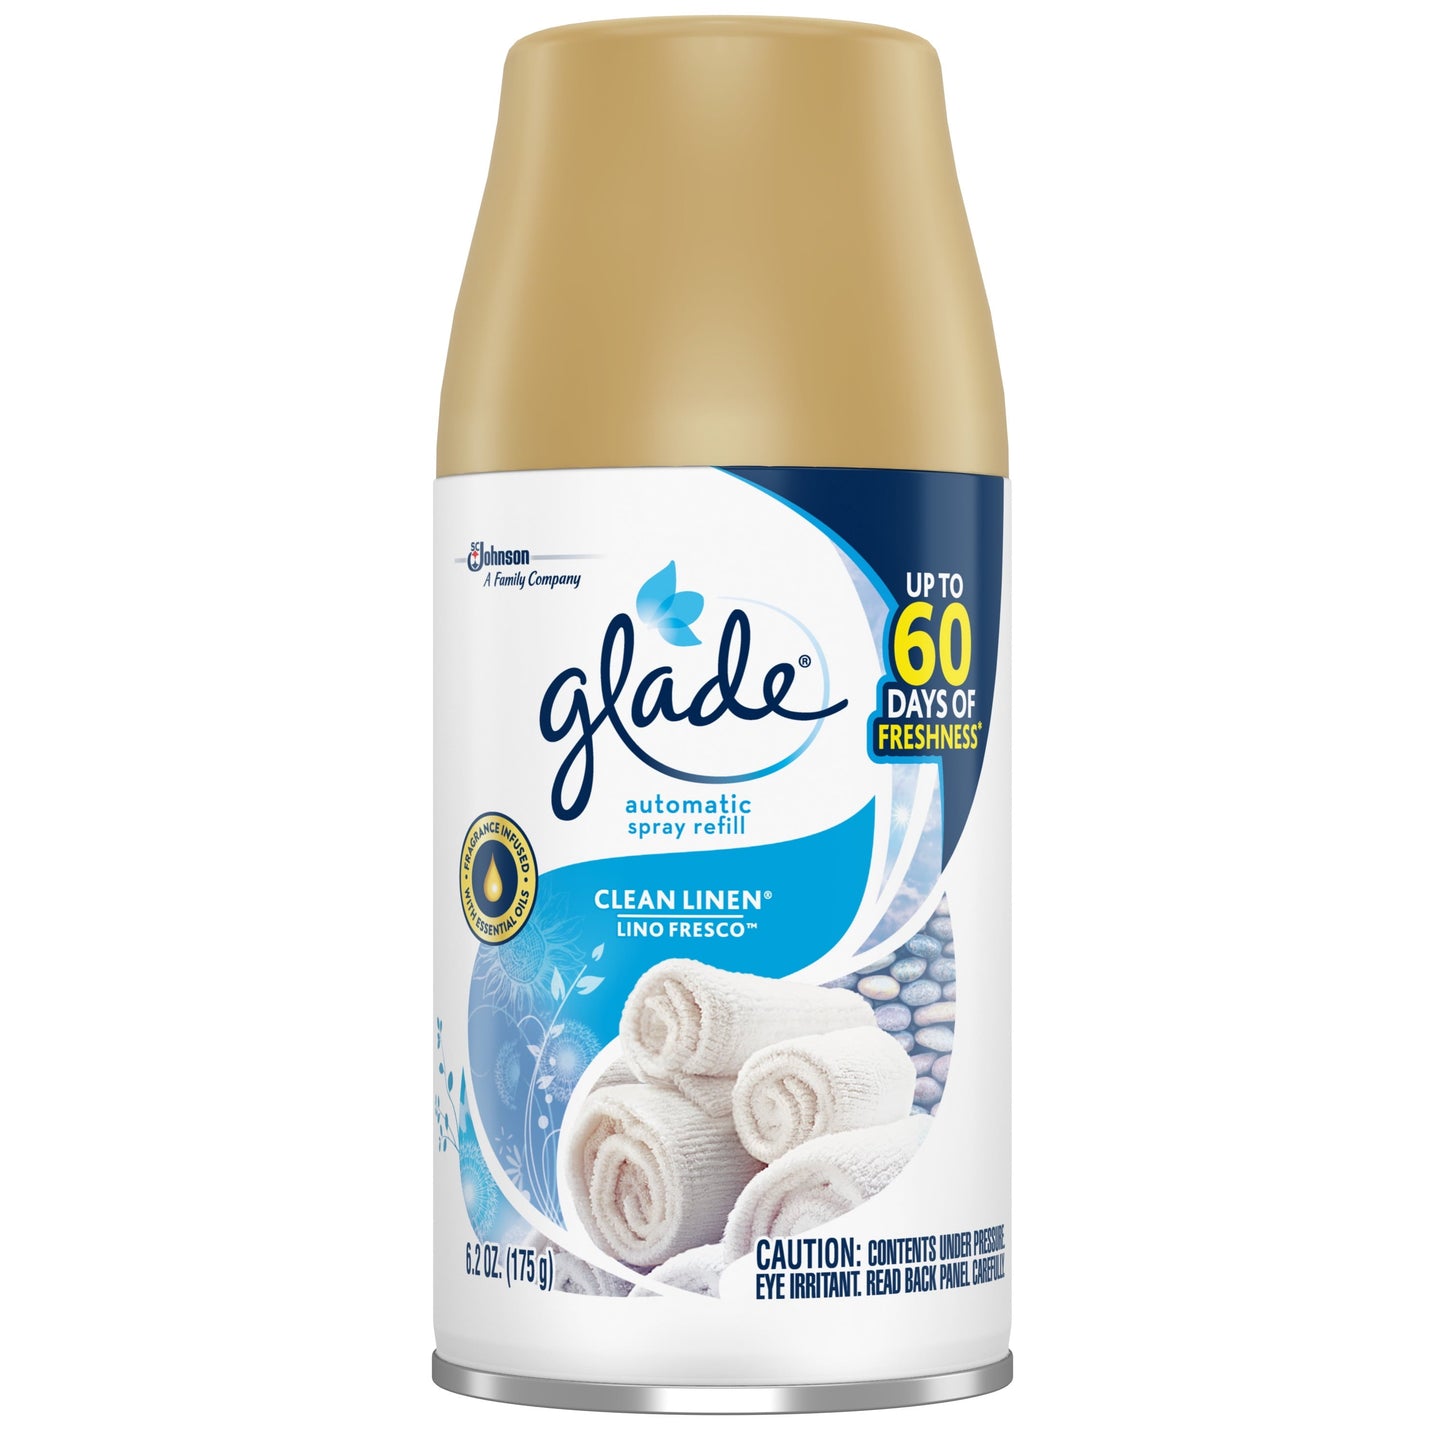 Glade Automatic Spray Refill Clean Linen, Fits in Holder For Up to 60 Days of Freshness, 6.2 oz, 1 Refill